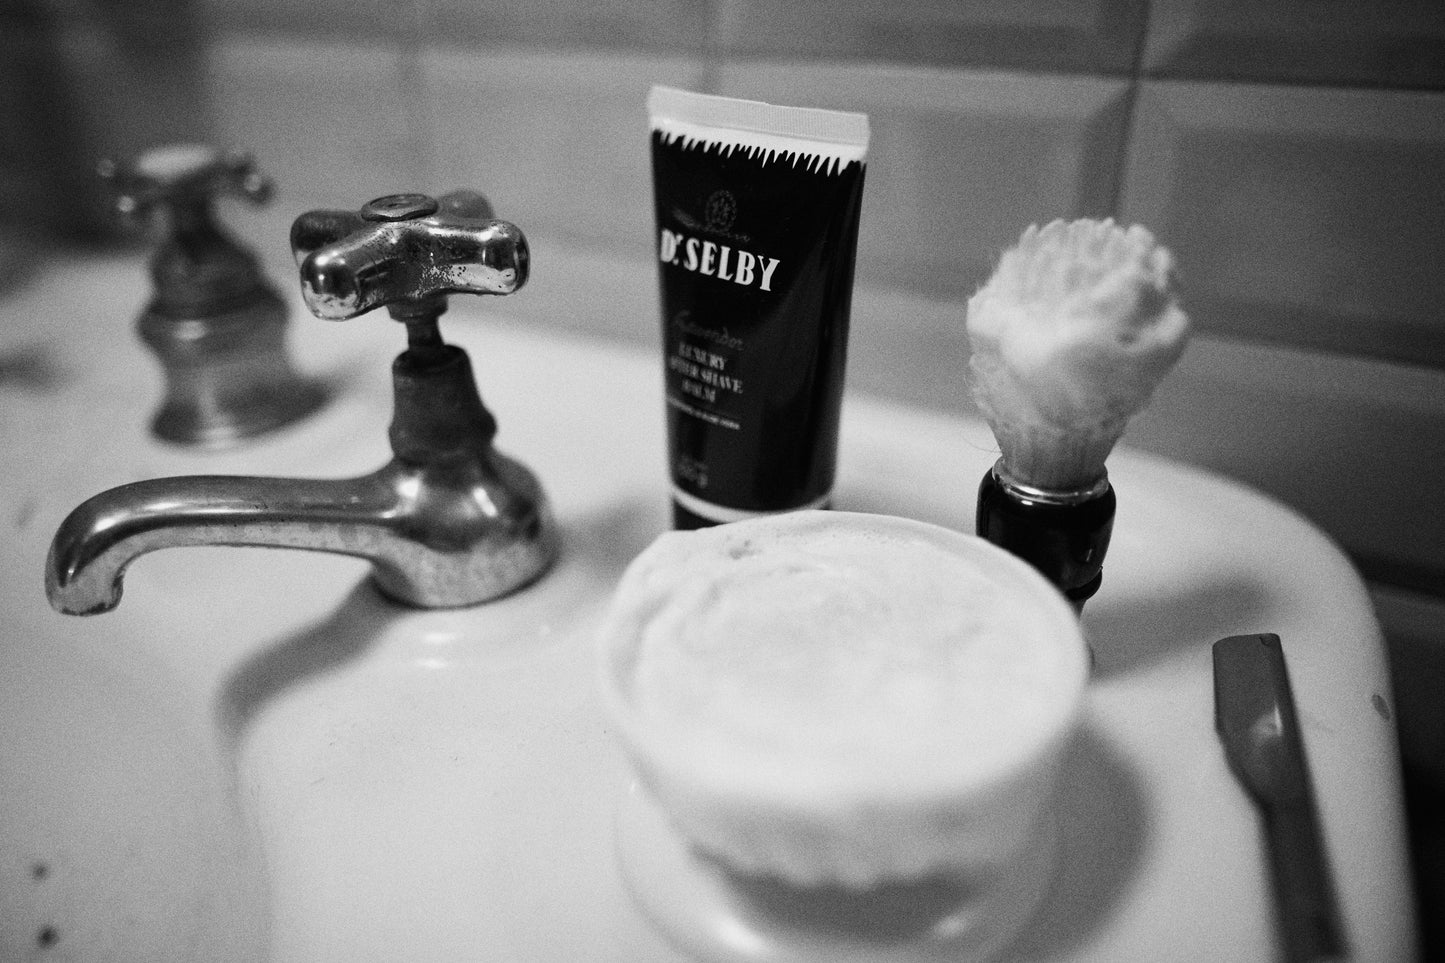 Dr. Selby Luxury 3x Concentrated Shaving Cream